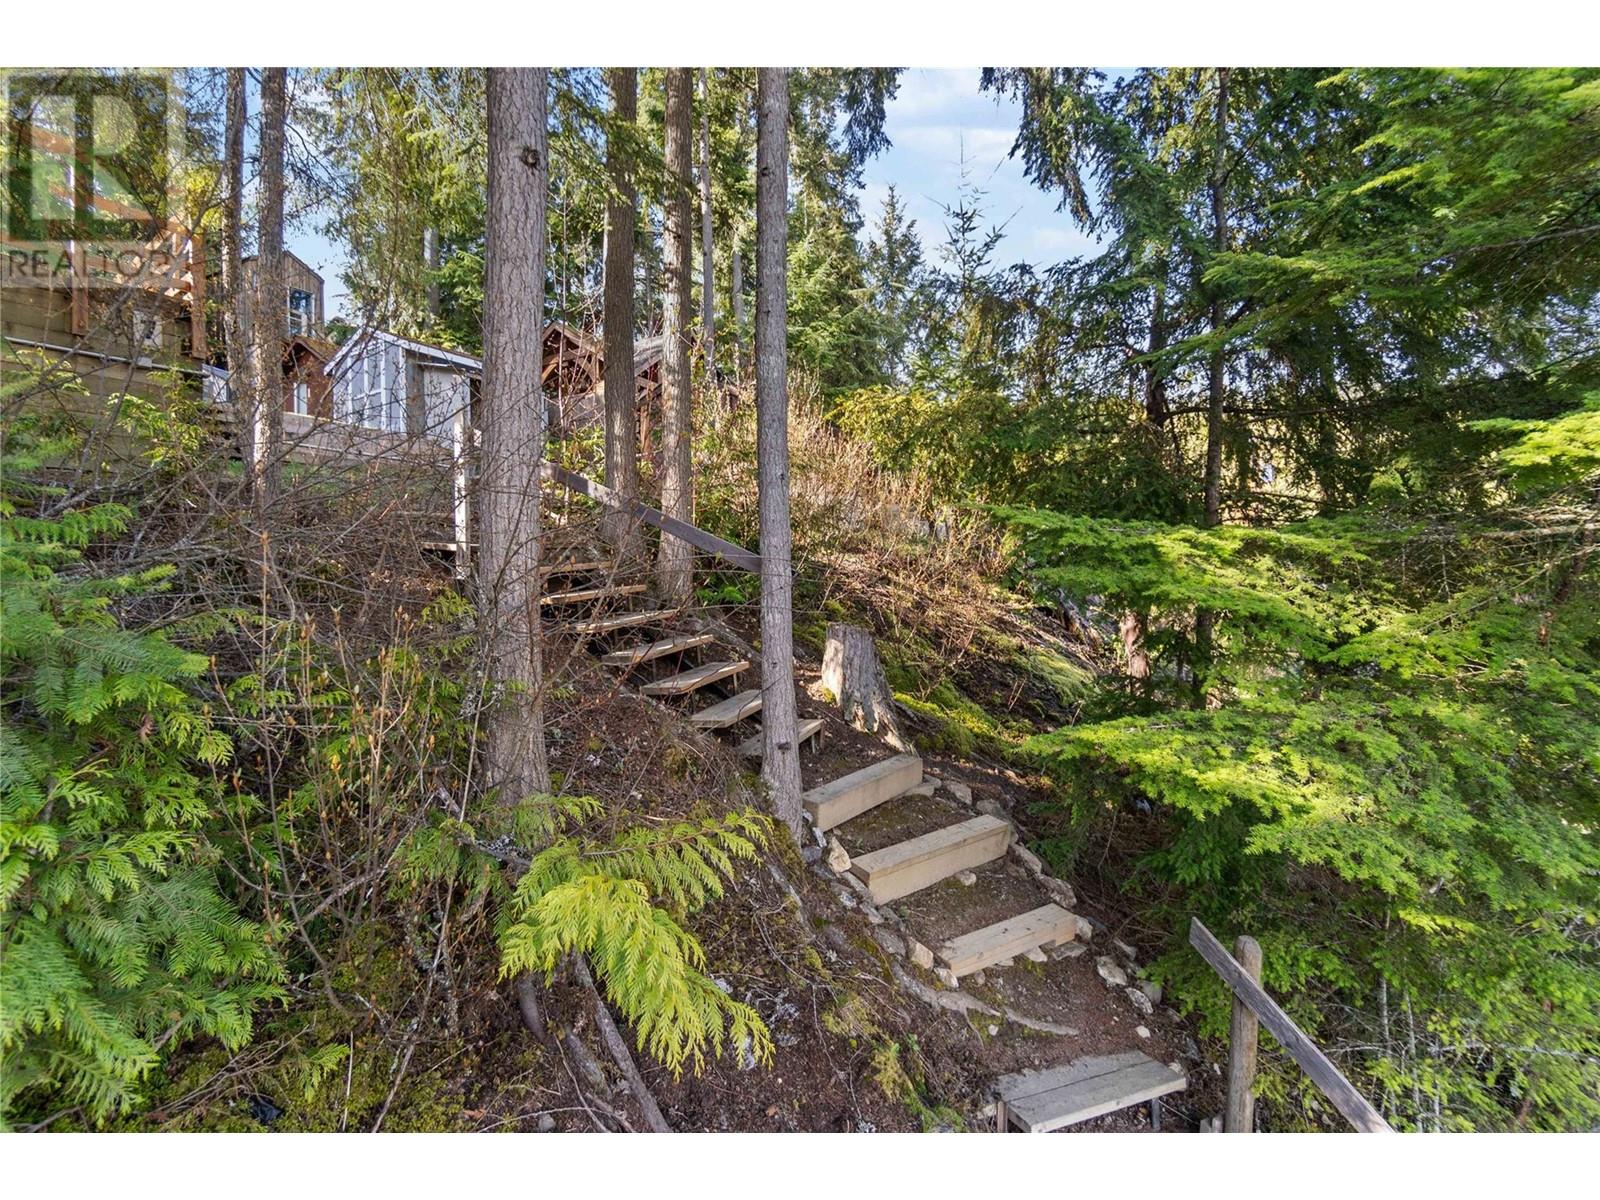  6300 Armstrong Road, Eagle Bay